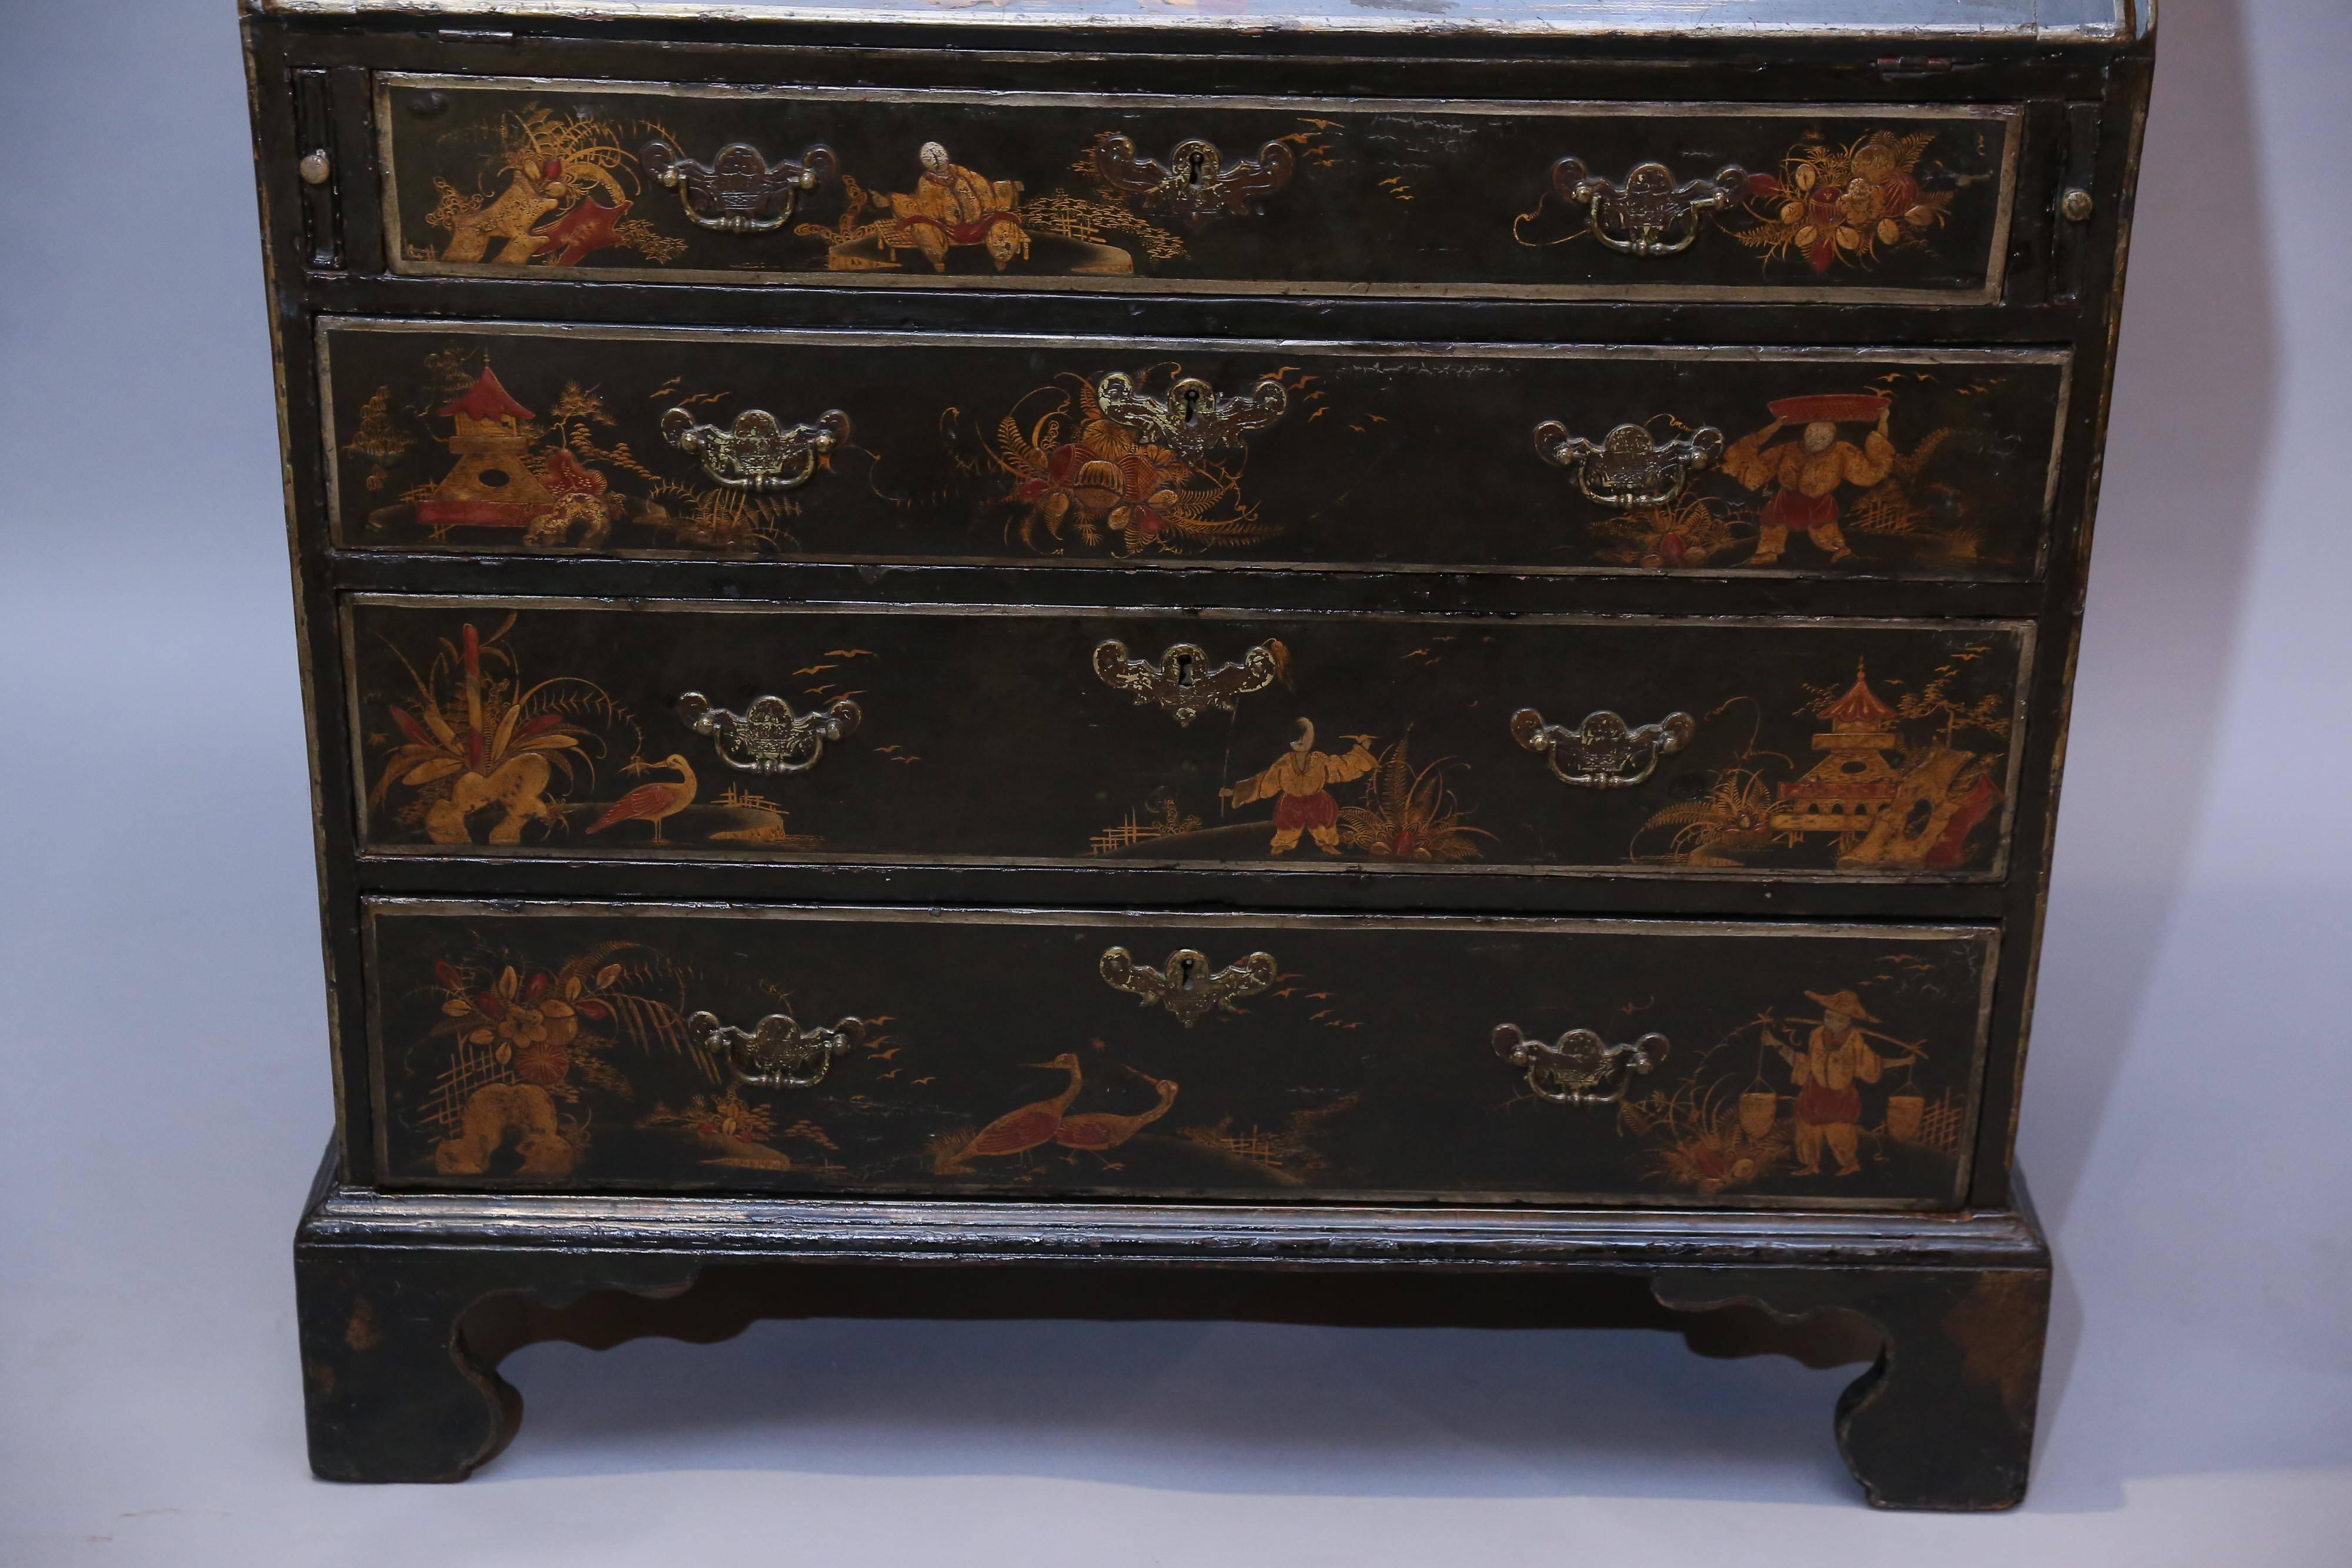 19th Century Antique English Black Chinoiserie Slant Desk with a Vibrant Red Interior